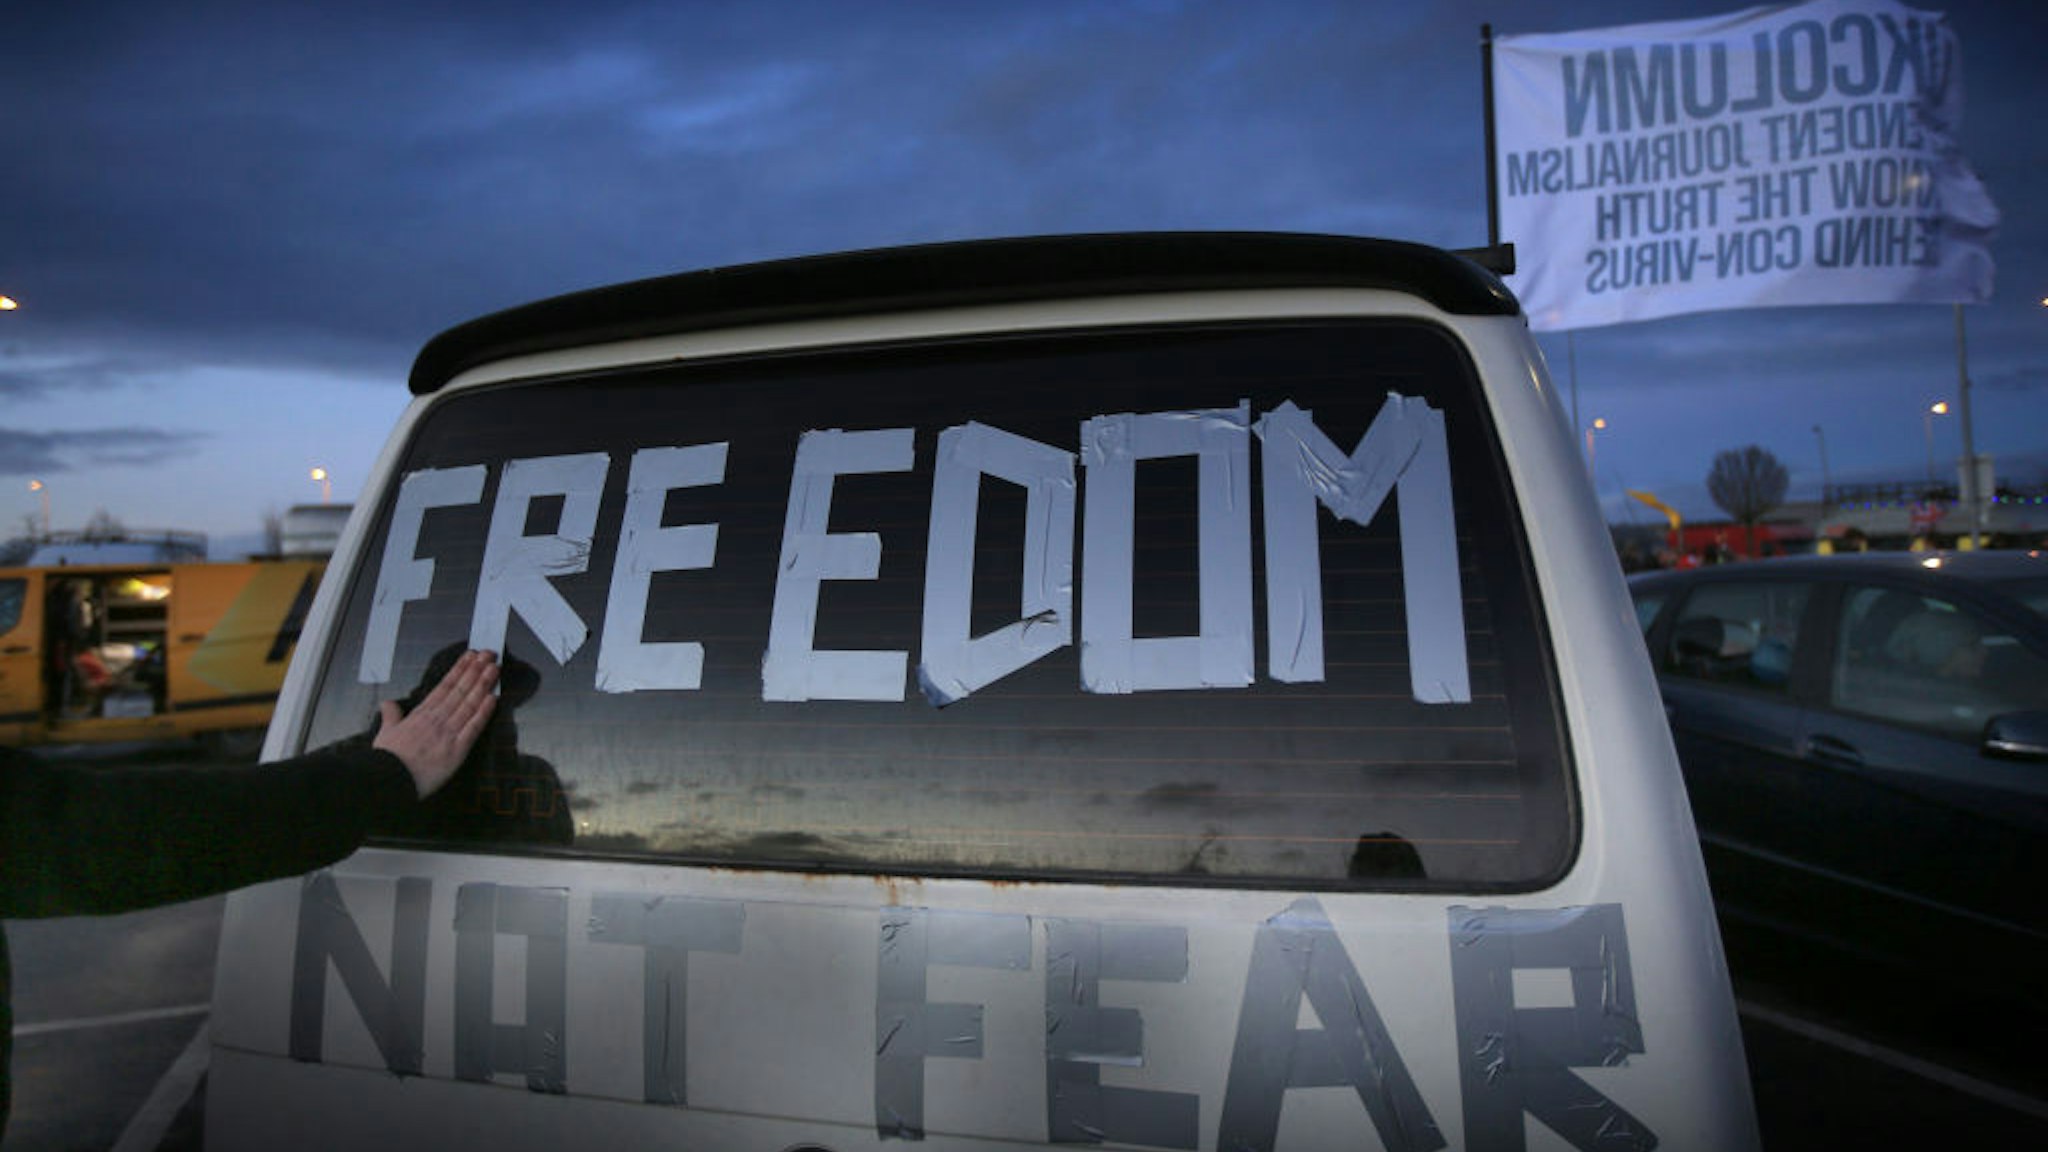 A protester tapes a Freedom not fear message on the back of his car at Cobham services on the M25 as protesters welcome fellow members of the convoy as they arrive on February 6, 2022 in Cobham, England.